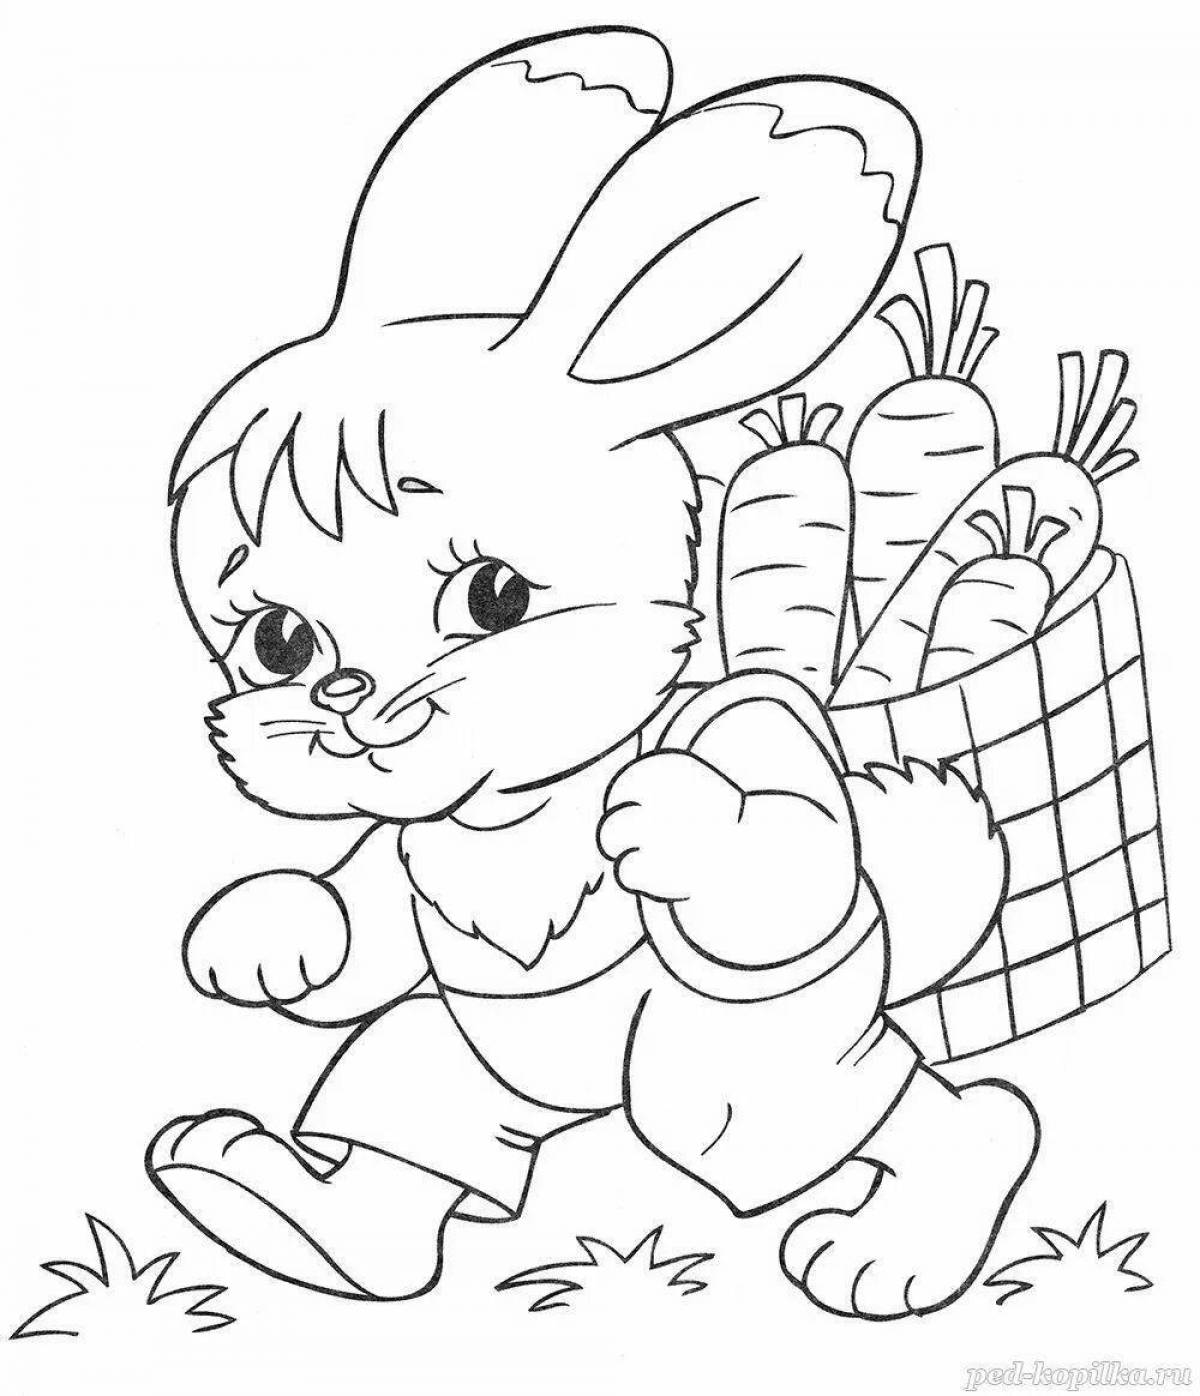 Coloring book colorful rabbit with carrots